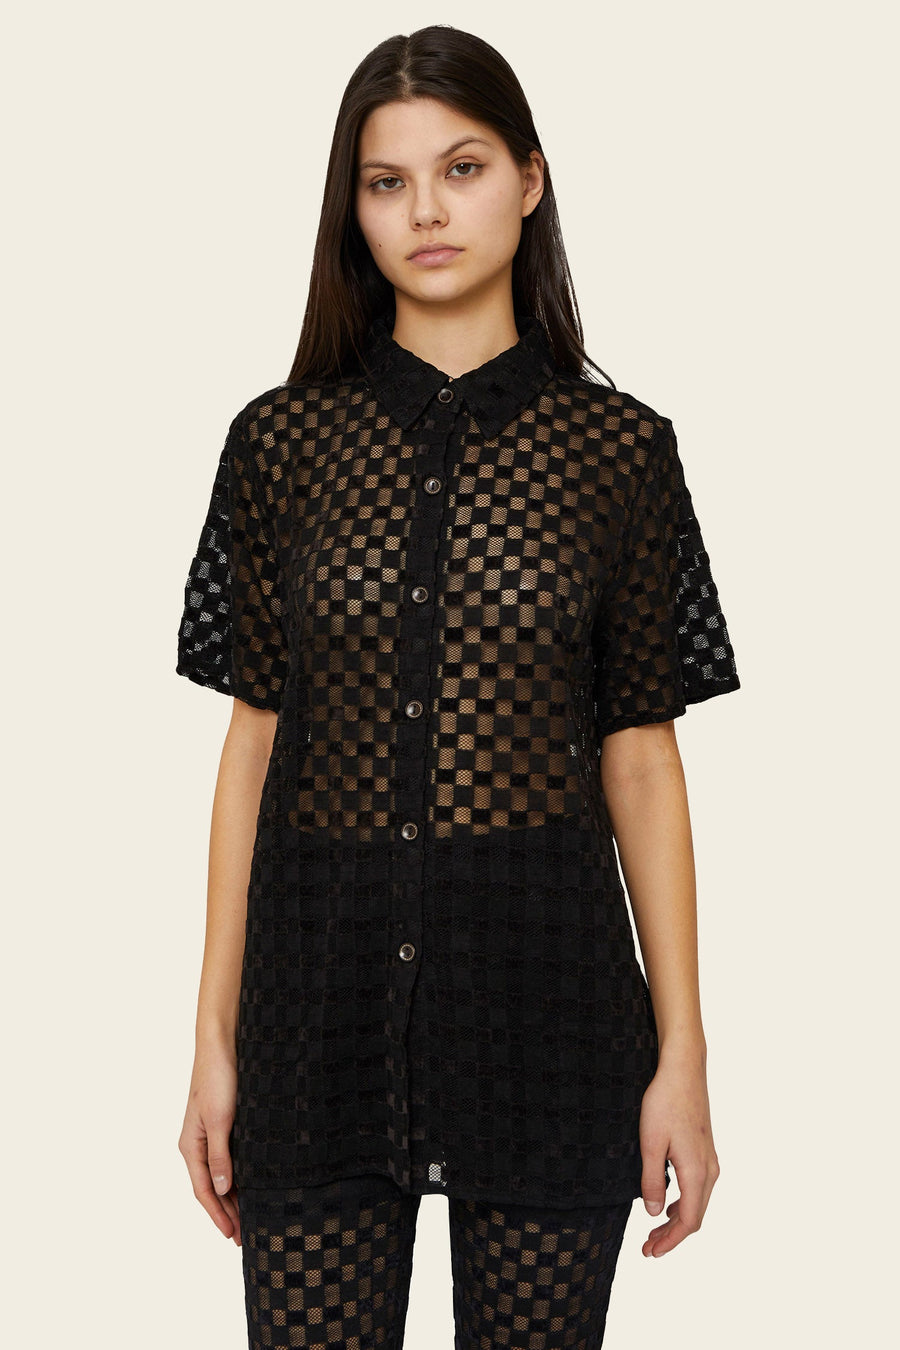 Harmony Velour Mesh Button Up in Black